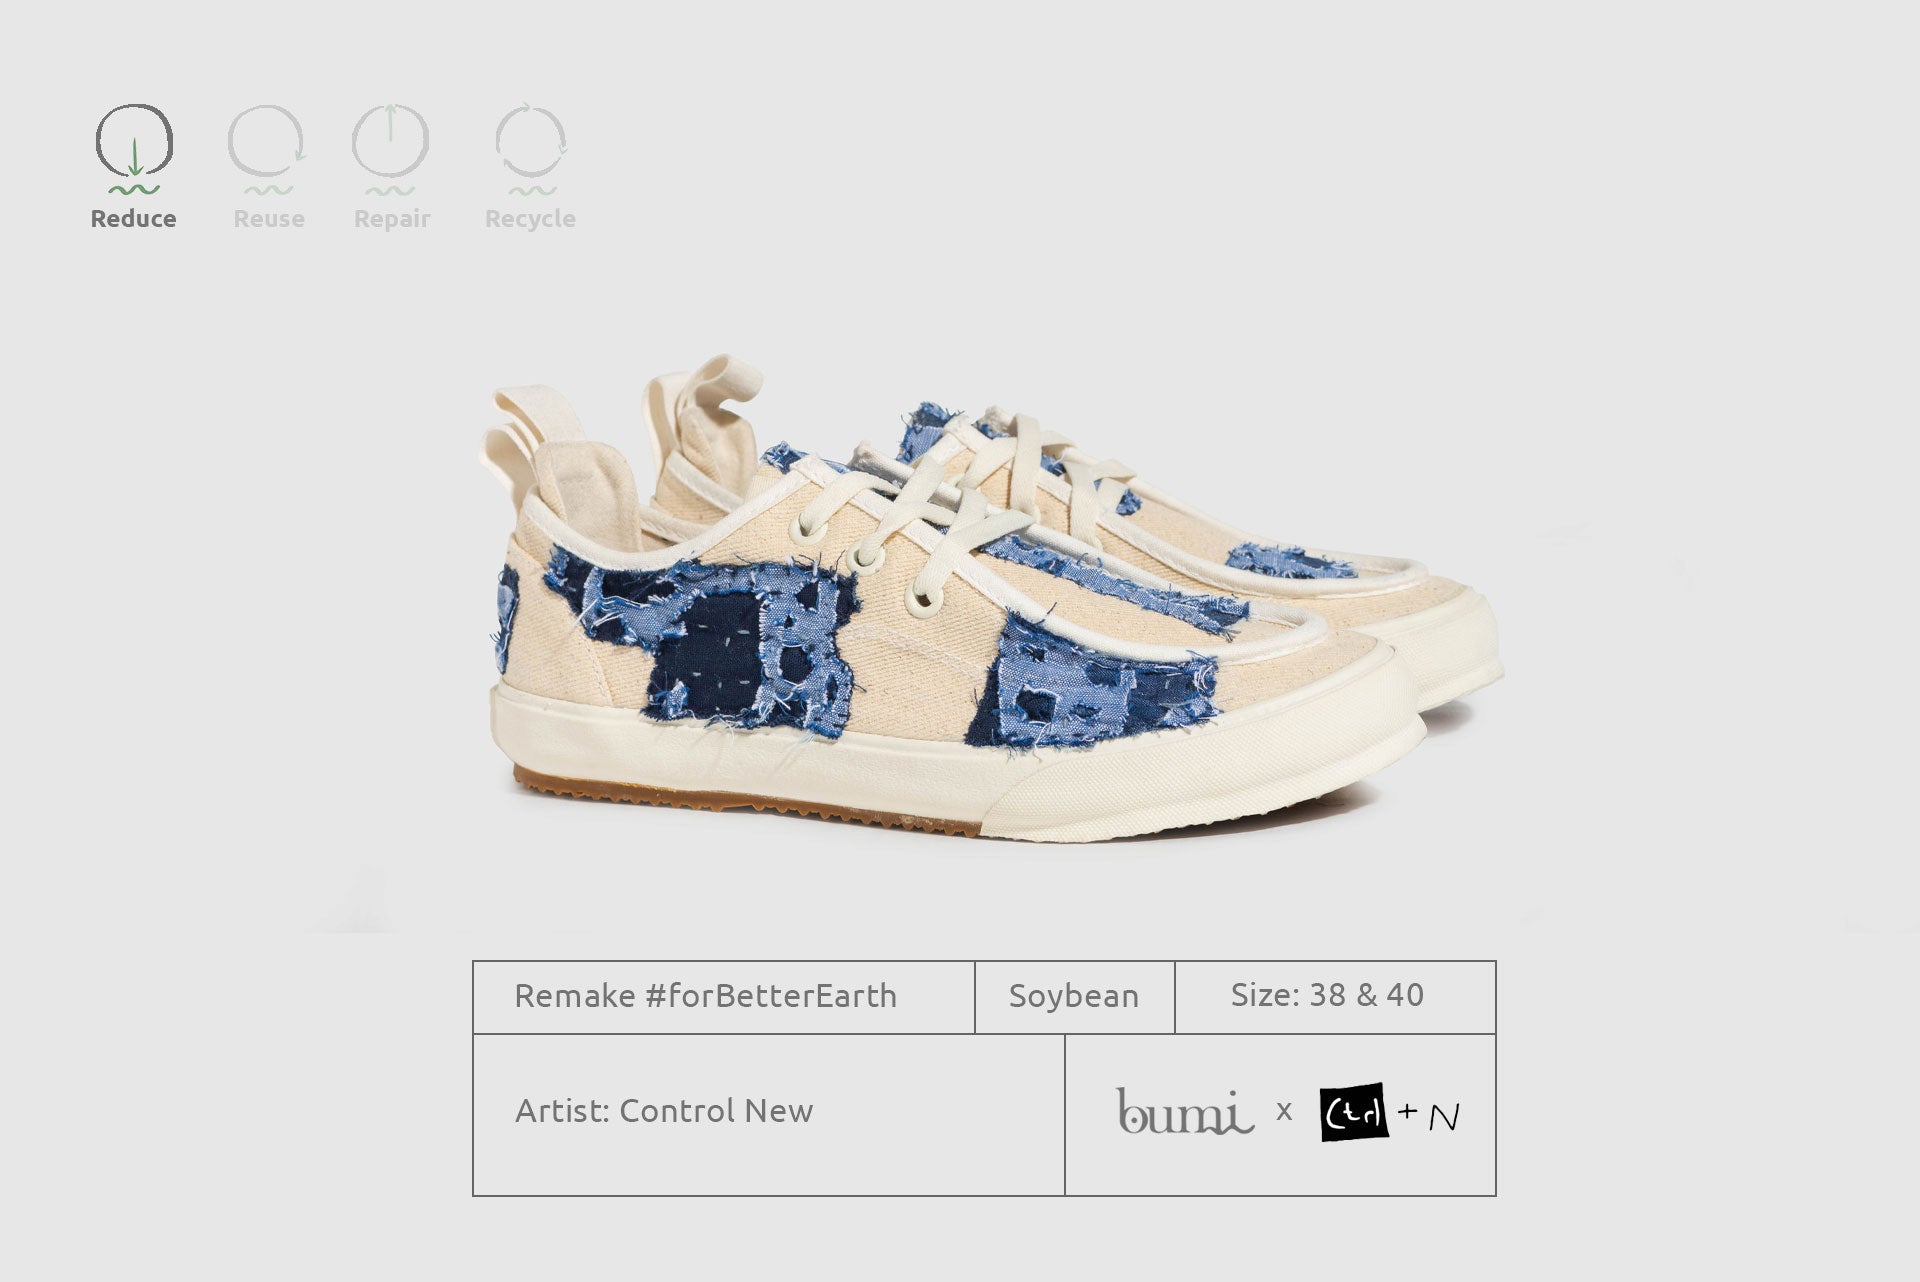 Kotta Hybrid Sneakers - Remade By Controlnew (Ctrl+N)